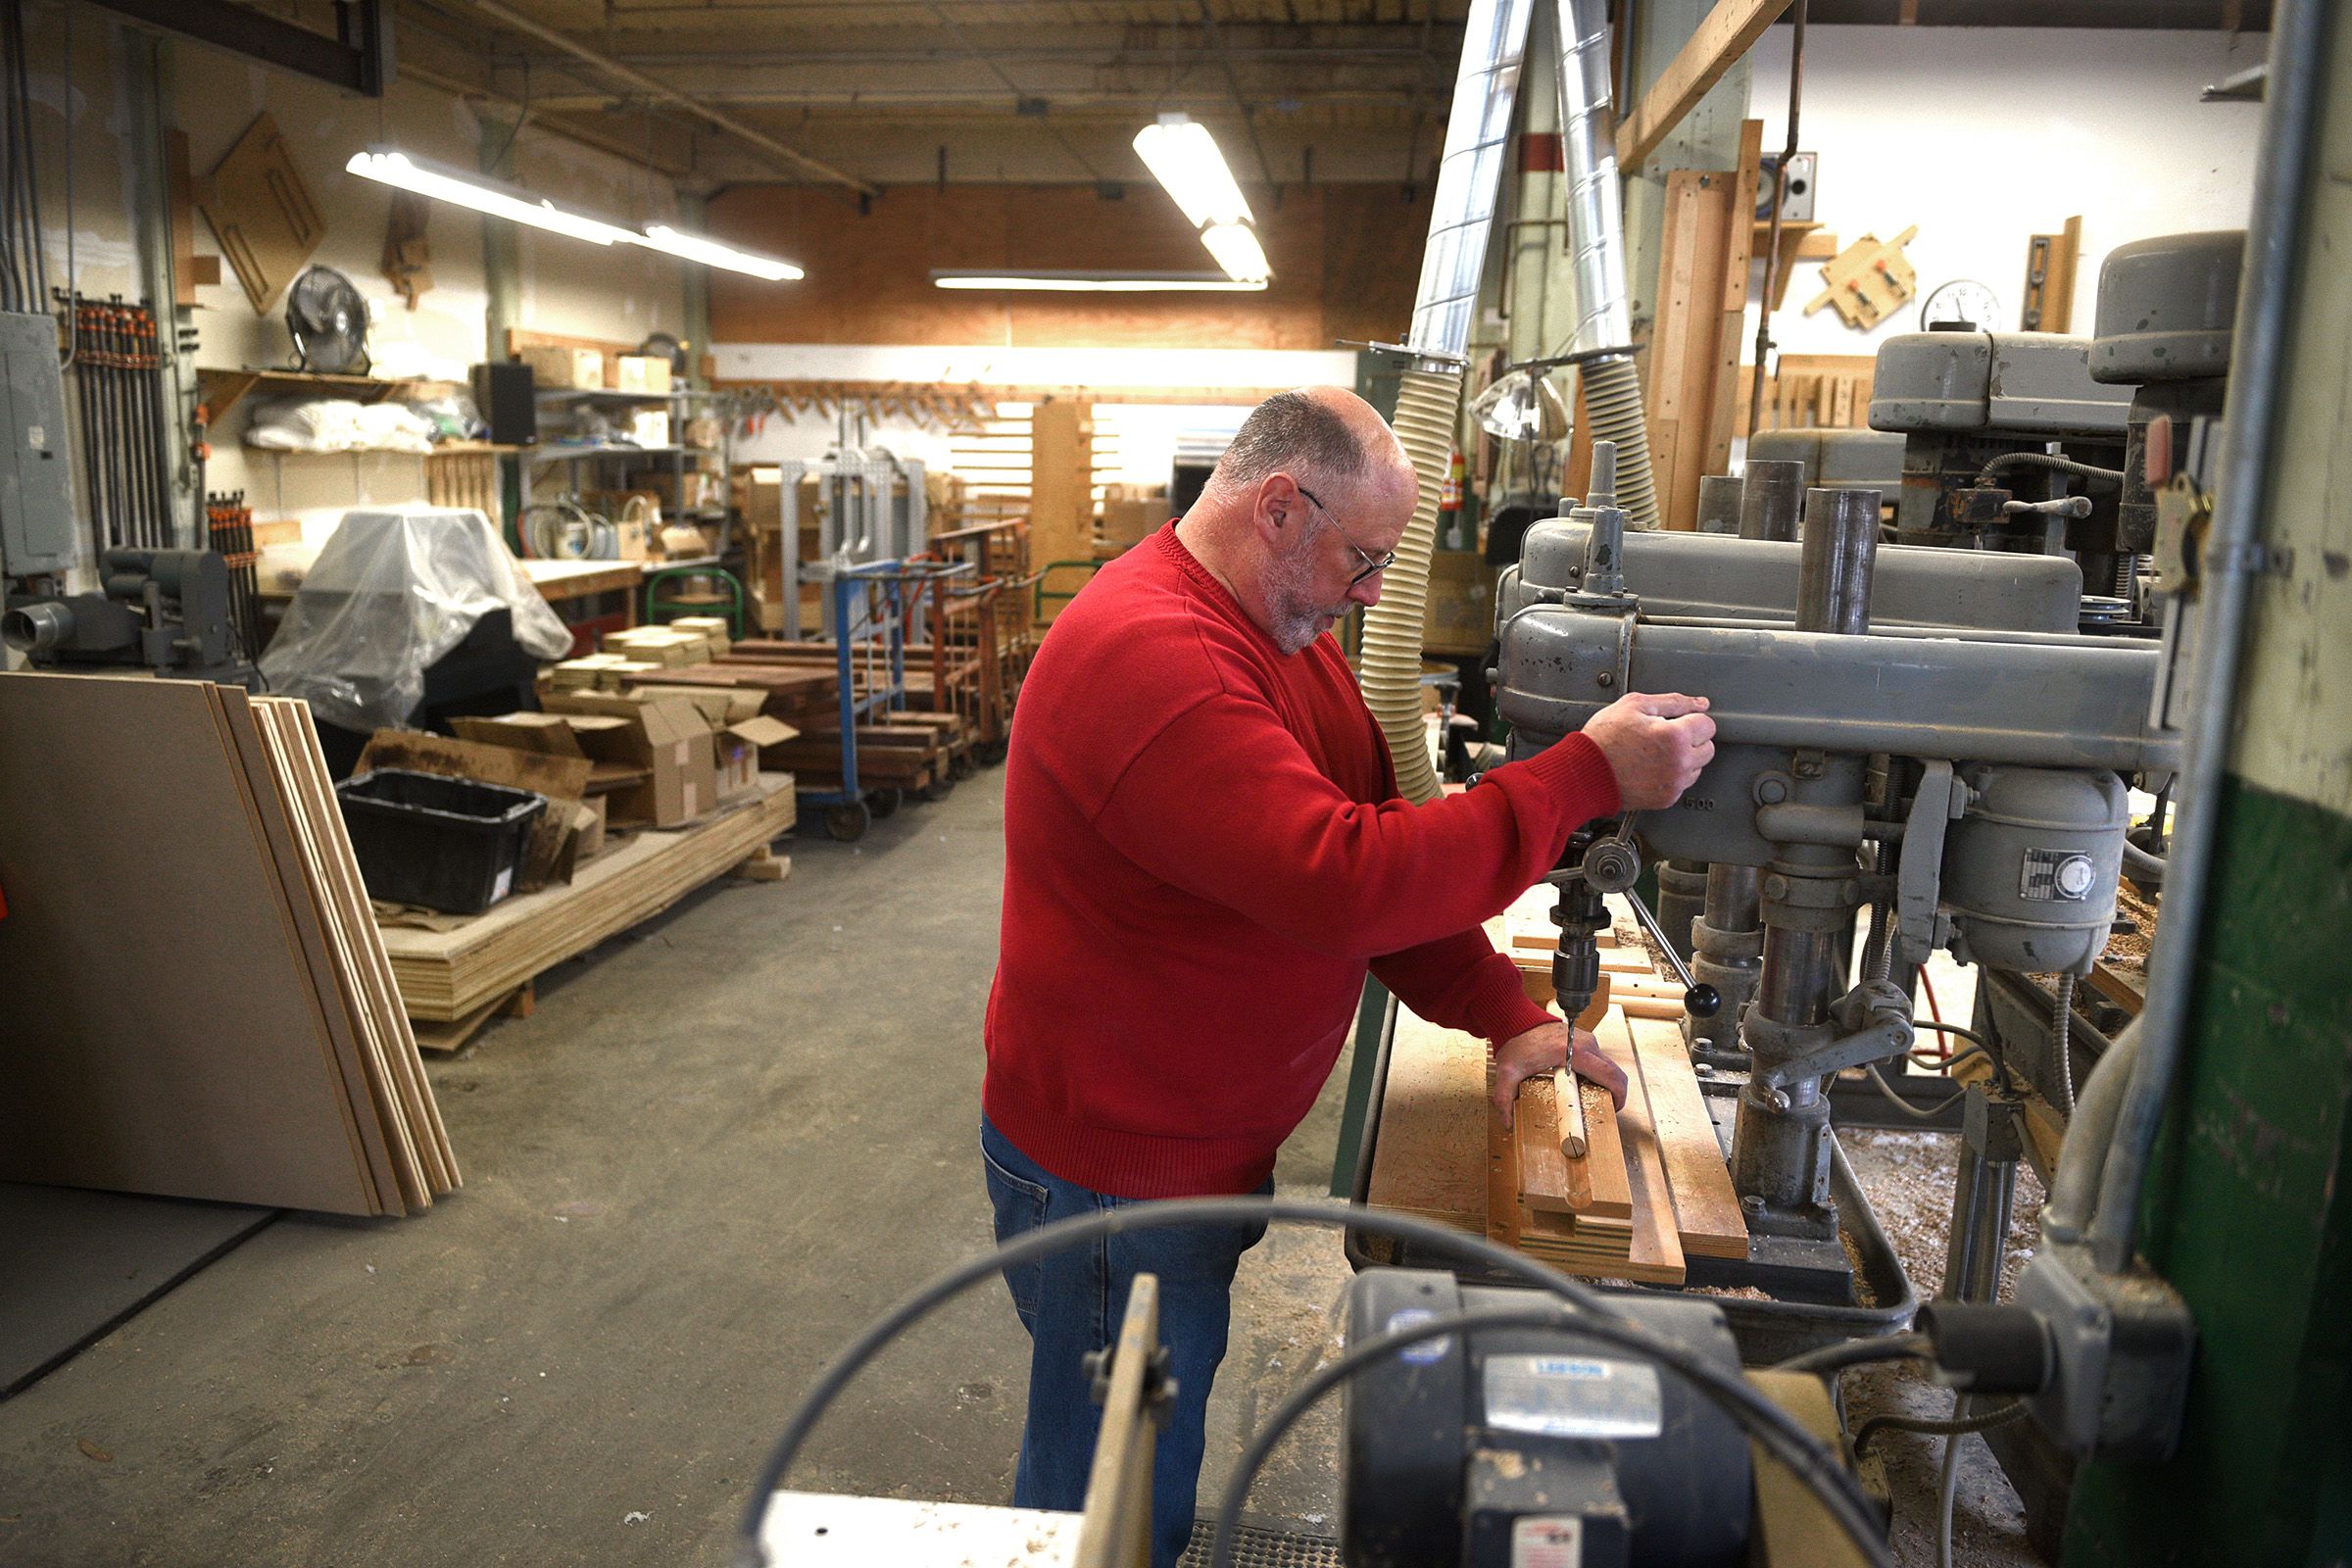 Andy Charron, who started his business in 1993 in a one-car garage in New Jersey, works in his shop in the former Goodyear manufacturing complex in Windsor, Vt., on Jan. 5, 2022. Charron Wood Products makes wooden component parts for other businesses. (Valley News - Jennifer Hauck) Copyright Valley News. May not be reprinted or used online without permission. Send requests to permission@vnews.com.